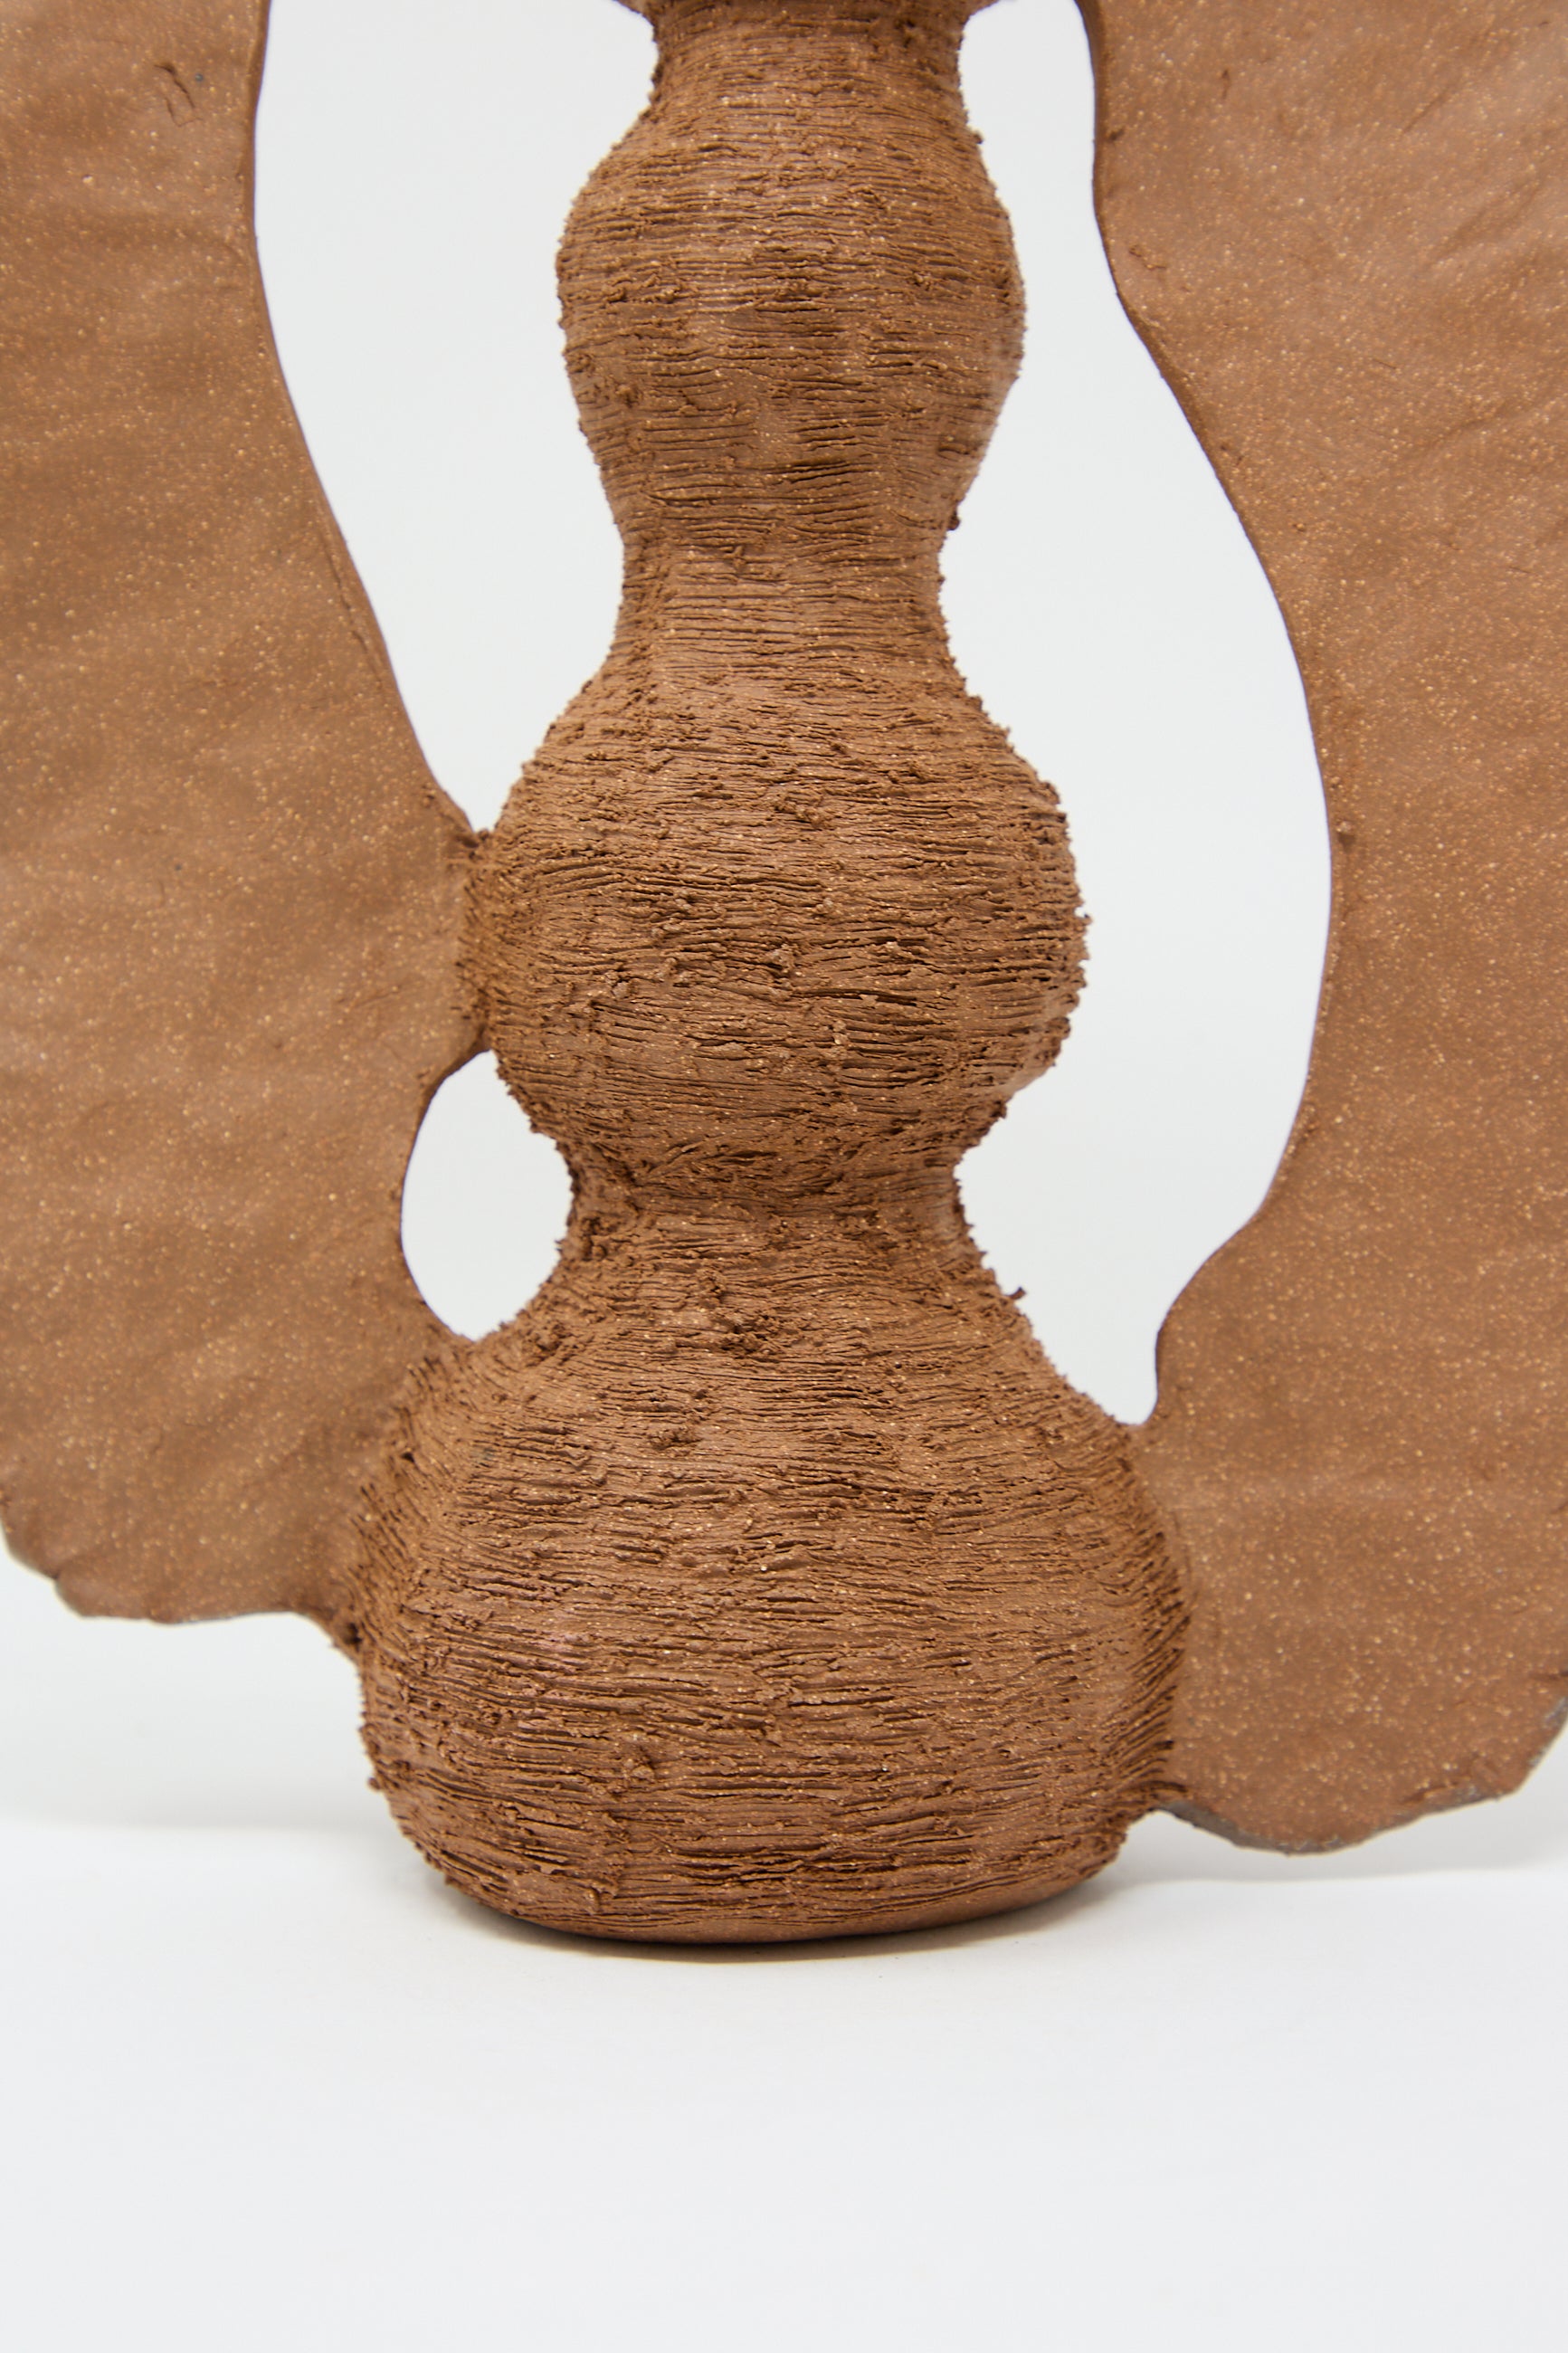 A textured sculpture with three stacked, spherical shapes and wing-like extensions, crafted from a material resembling clay or wood, evokes the charm of The Flying Ra Vase by Tania Whalen, set against a plain white background.